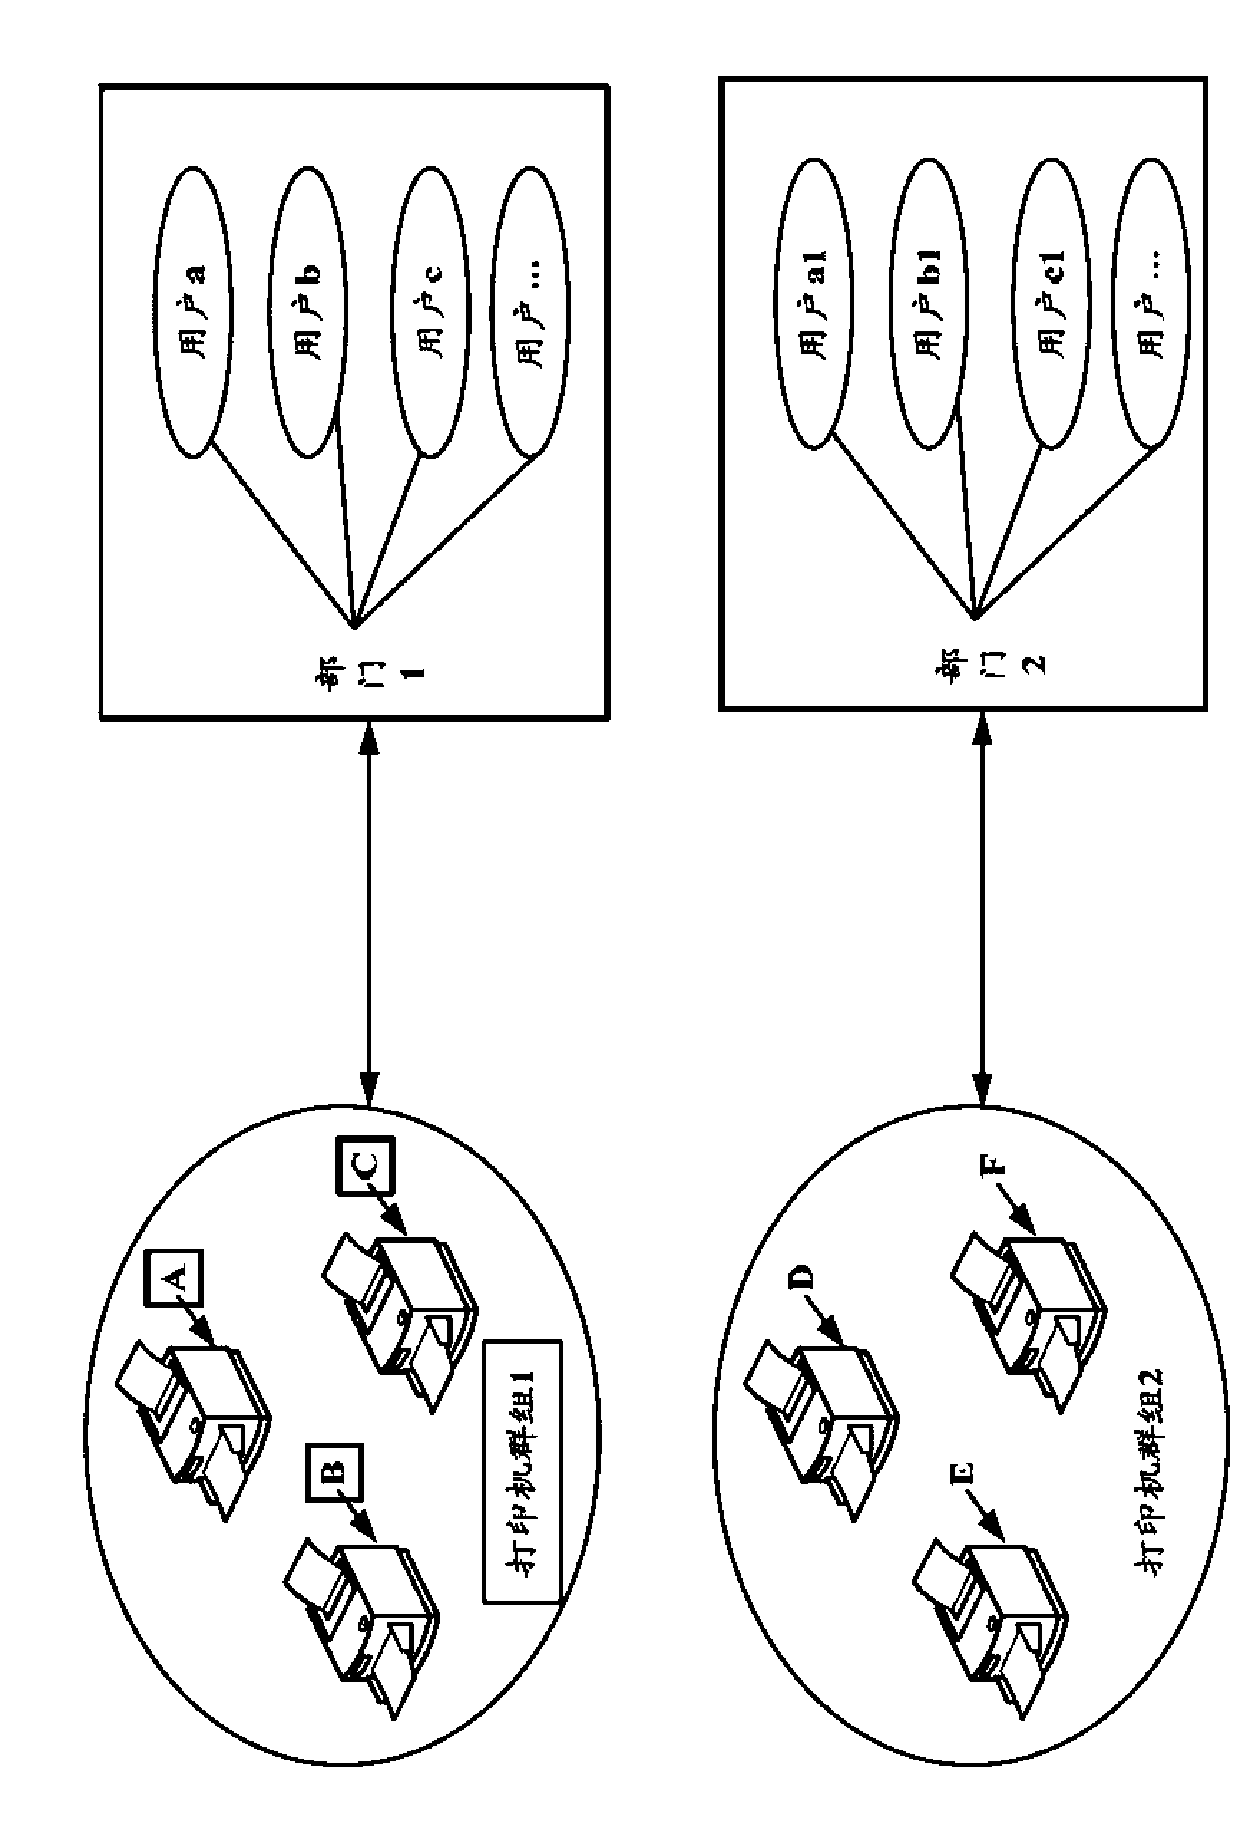 System and method for cluster printing